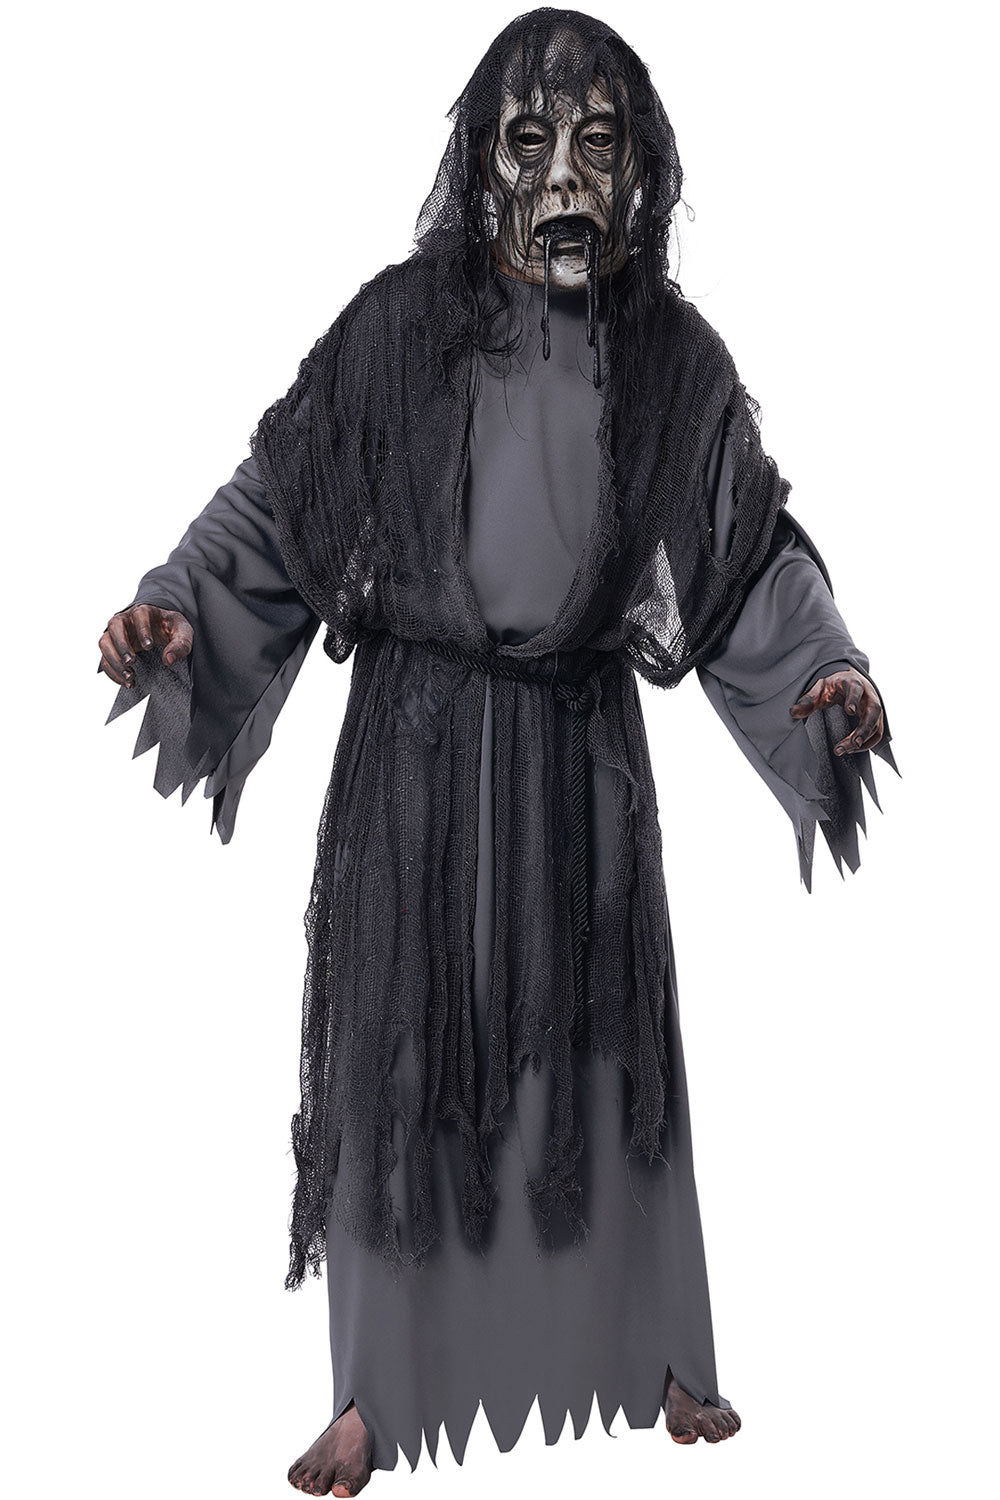 Ghoul In The Graveyard / Child California Costume 3120/091